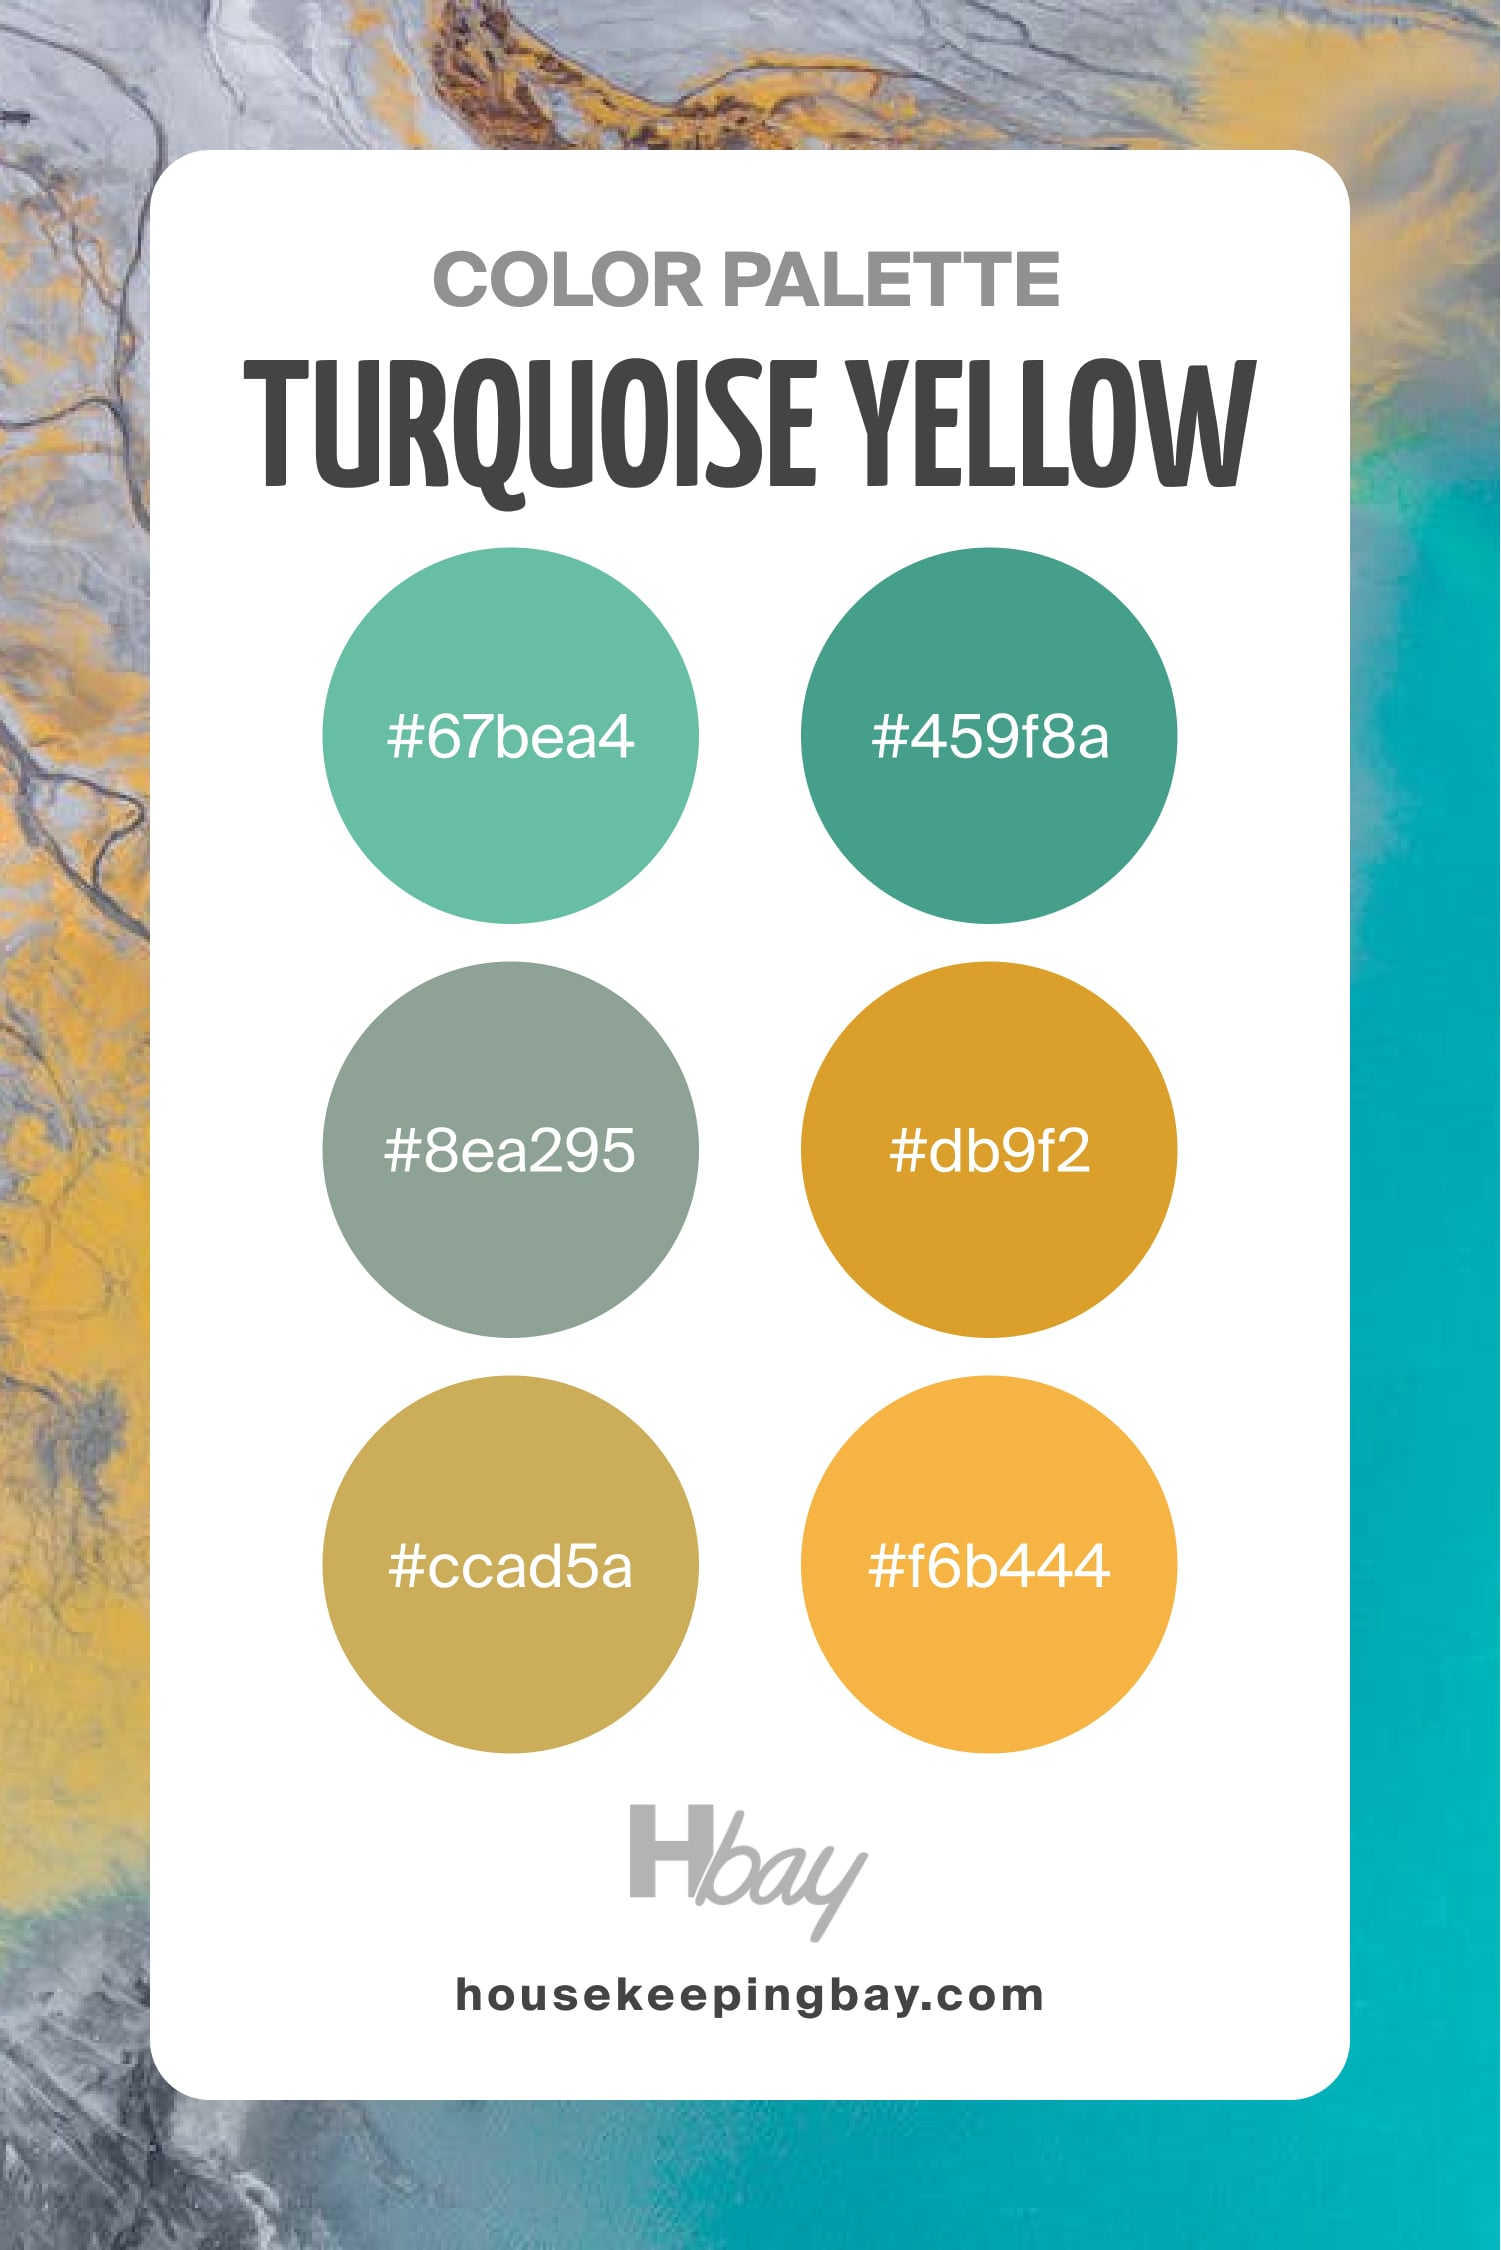 Turquoise Yellow Palette